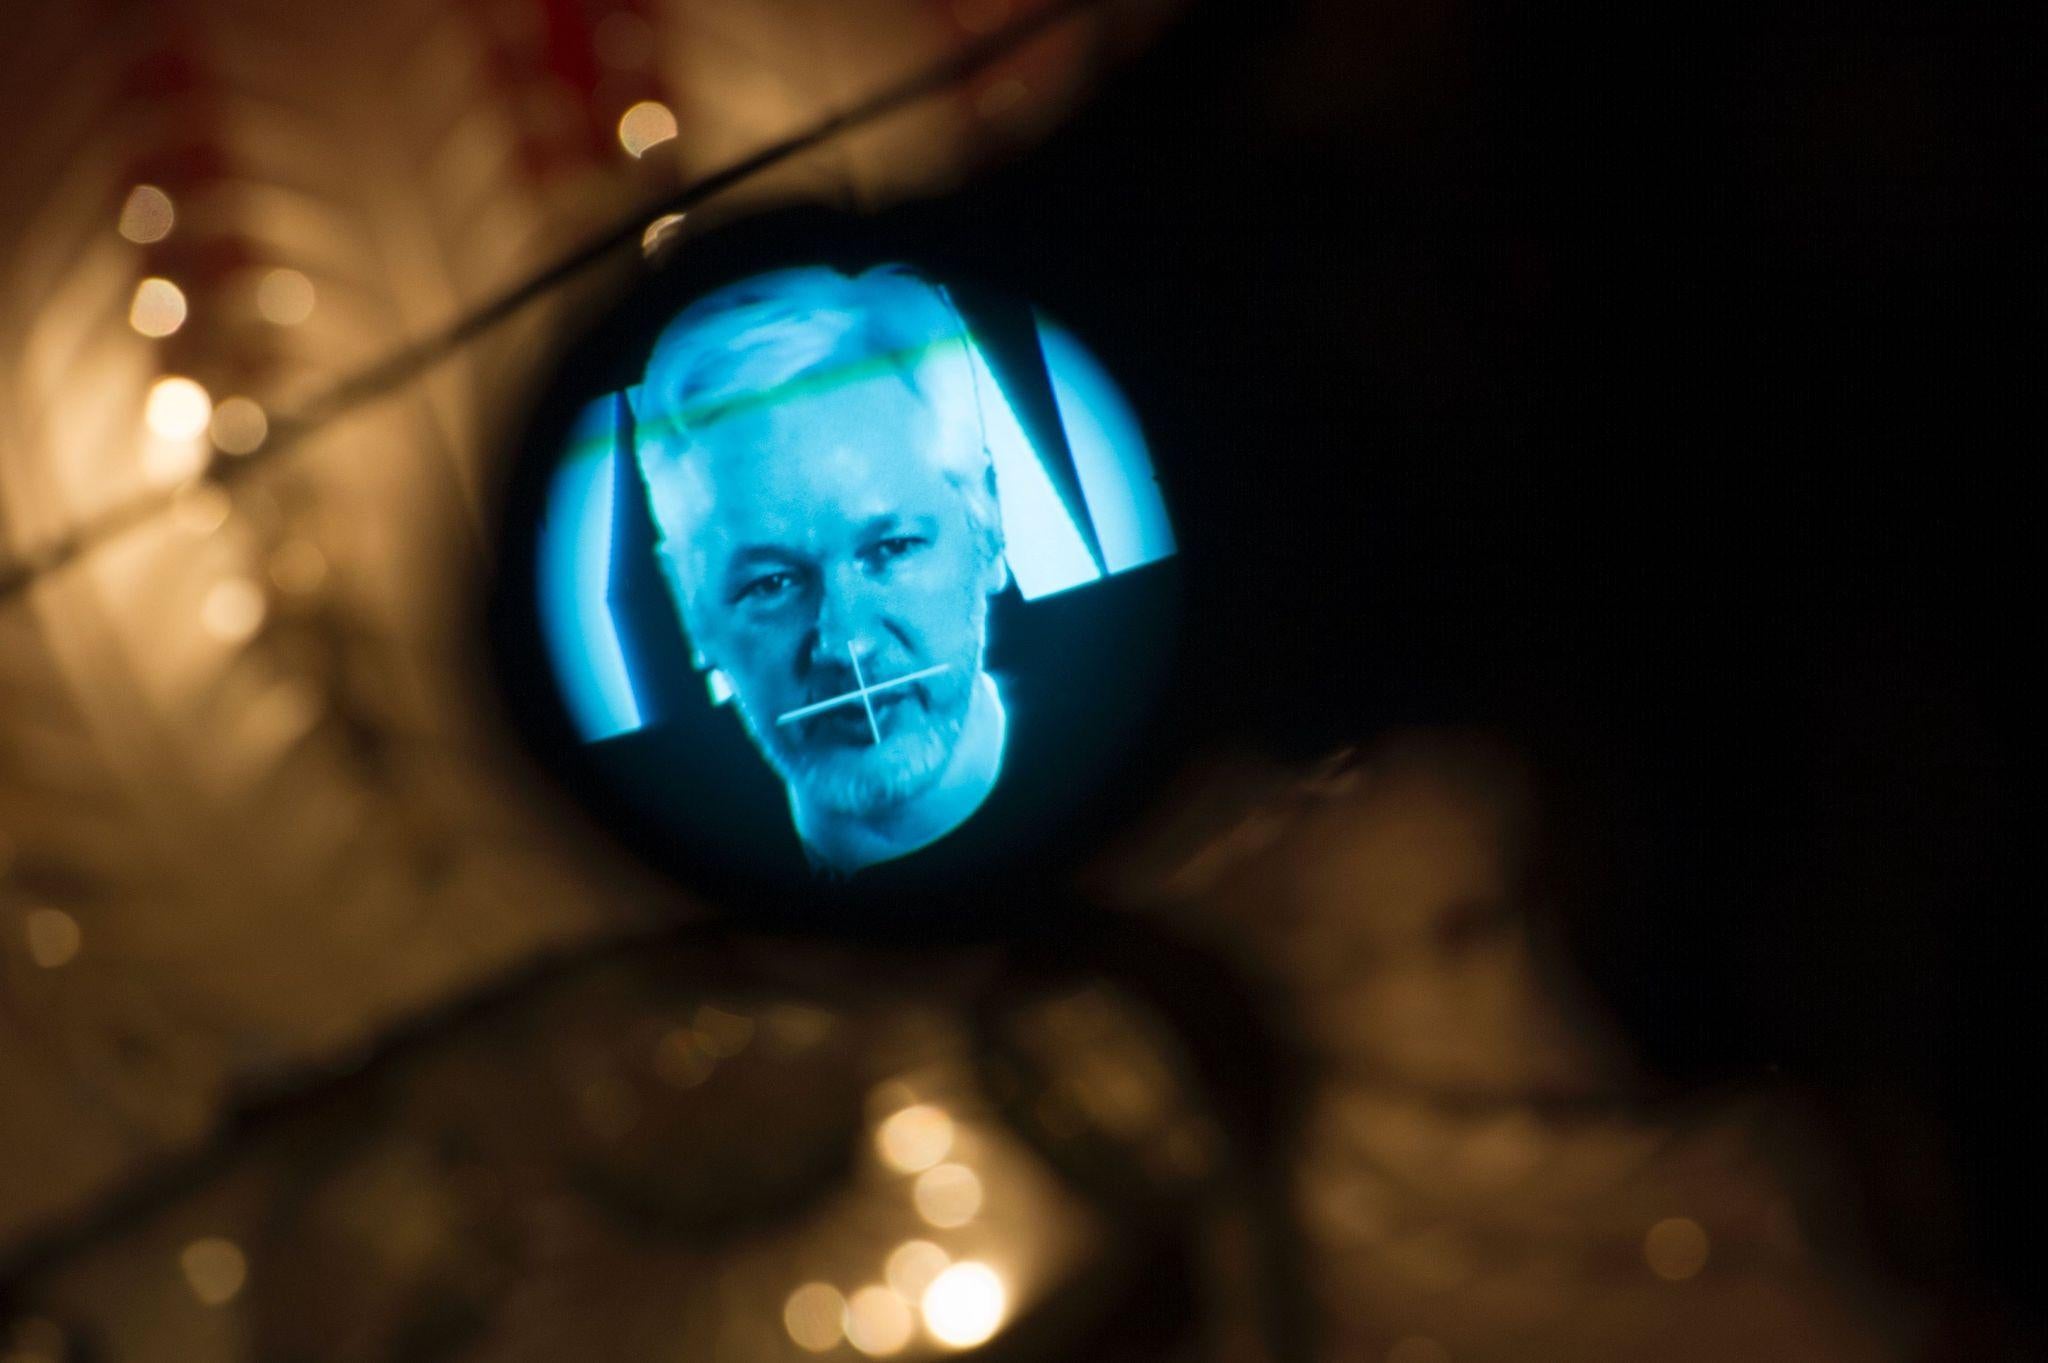 Julian Assange, founder of the online leaking platform WikiLeaks, is seen through the eyepeace of a camera as he is displayed on a screen via a live video connection during a press conference on the platform's 10th anniversary on October 4, 2016 in Berlin